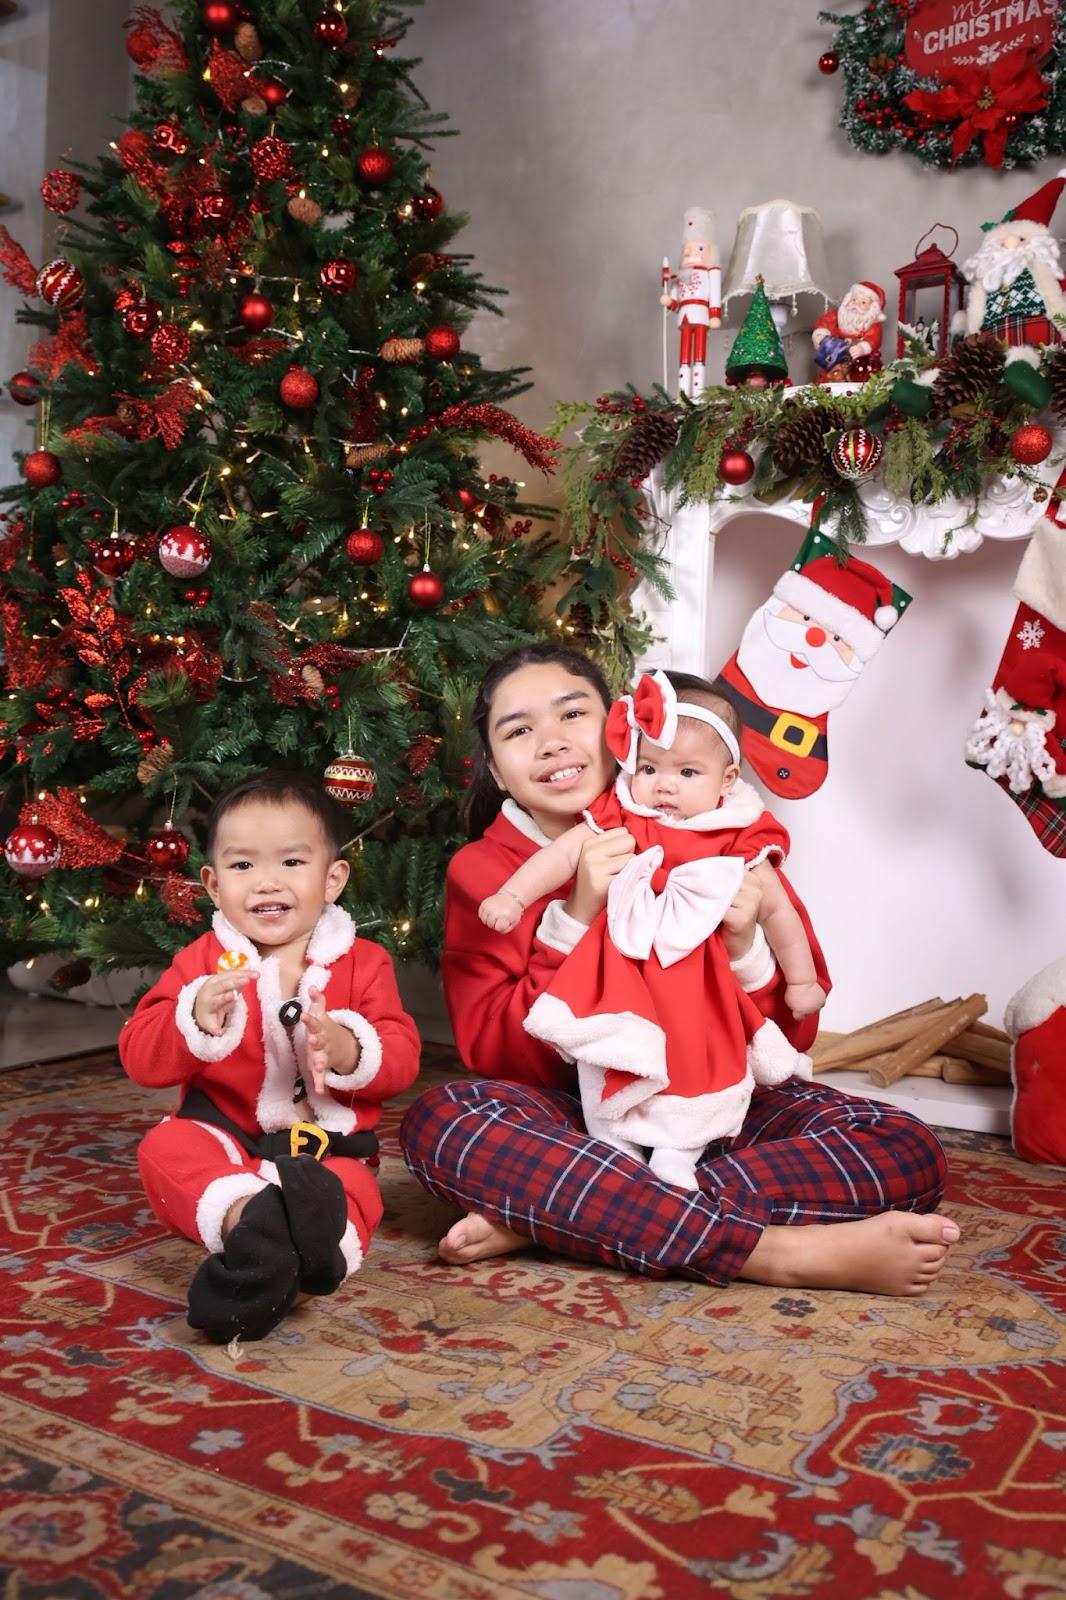 newborn christmas photo idea: newborn dressed up in a Christmas dress posing with older sister wearing Christmas sweater and older brother wearing a Santa outfit